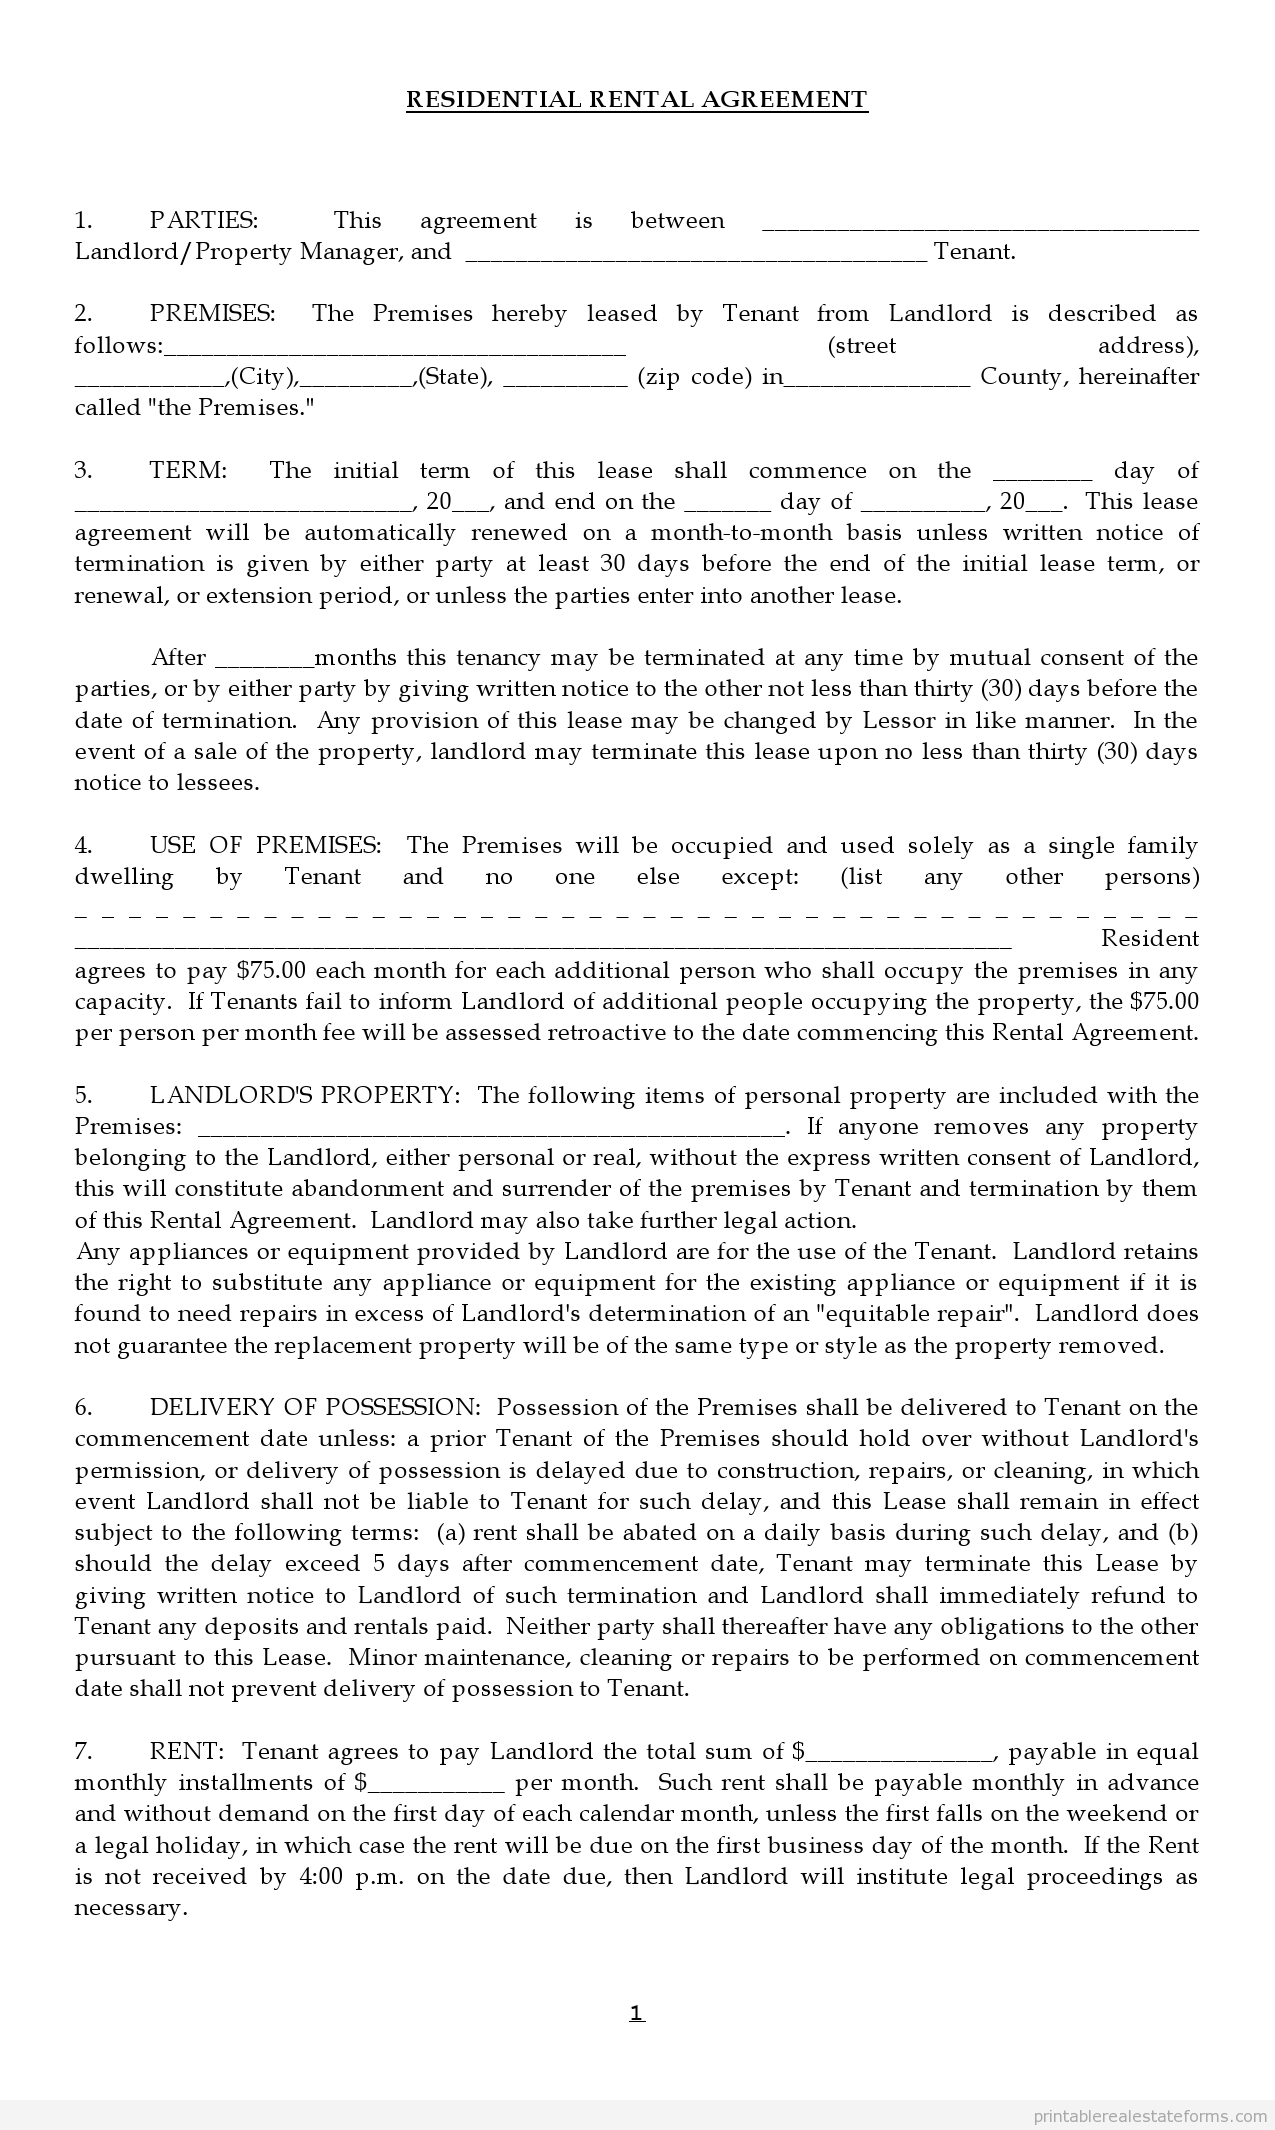 Examples Of Lease Agreements Free Printable Residential Lease Agreements Ataumberglauf Verband